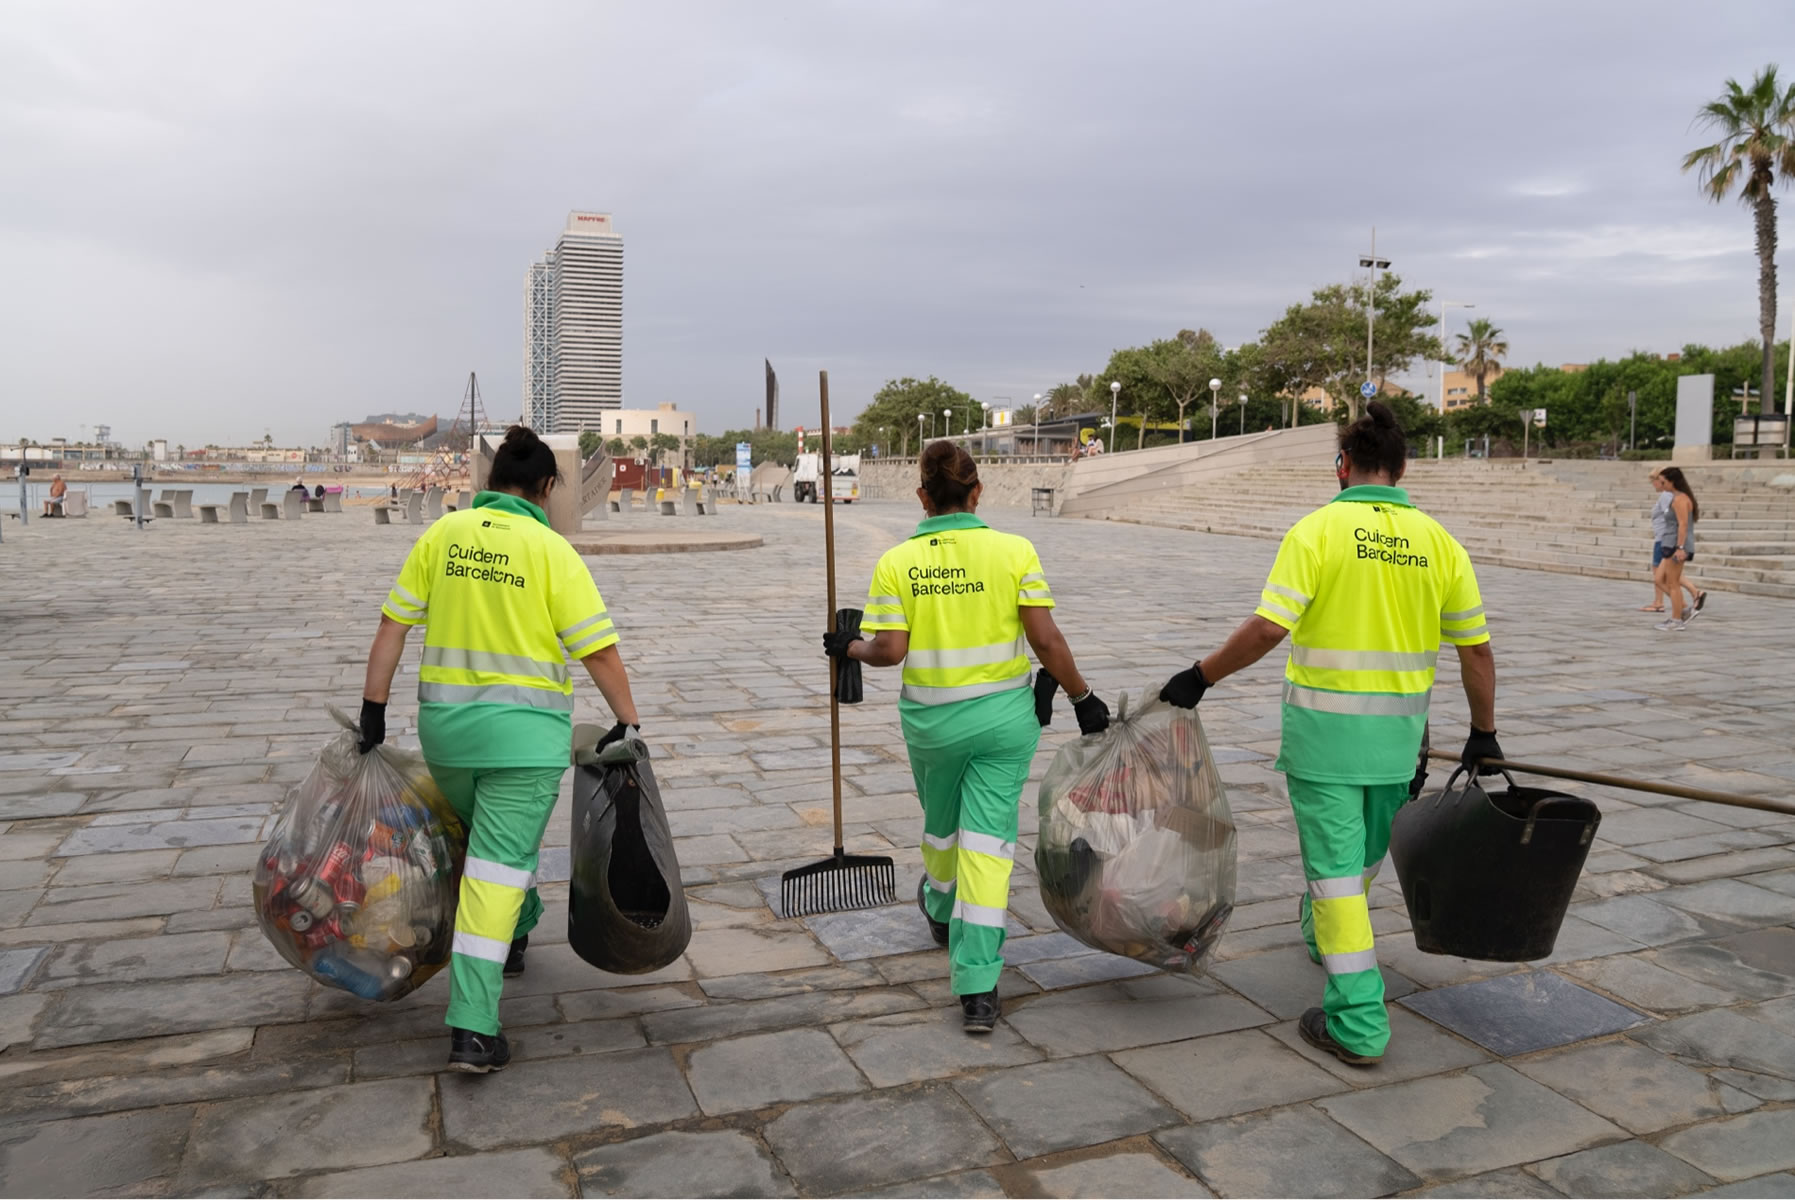 Staff from the Cuidem Barcelona cleaning service working on the beaches